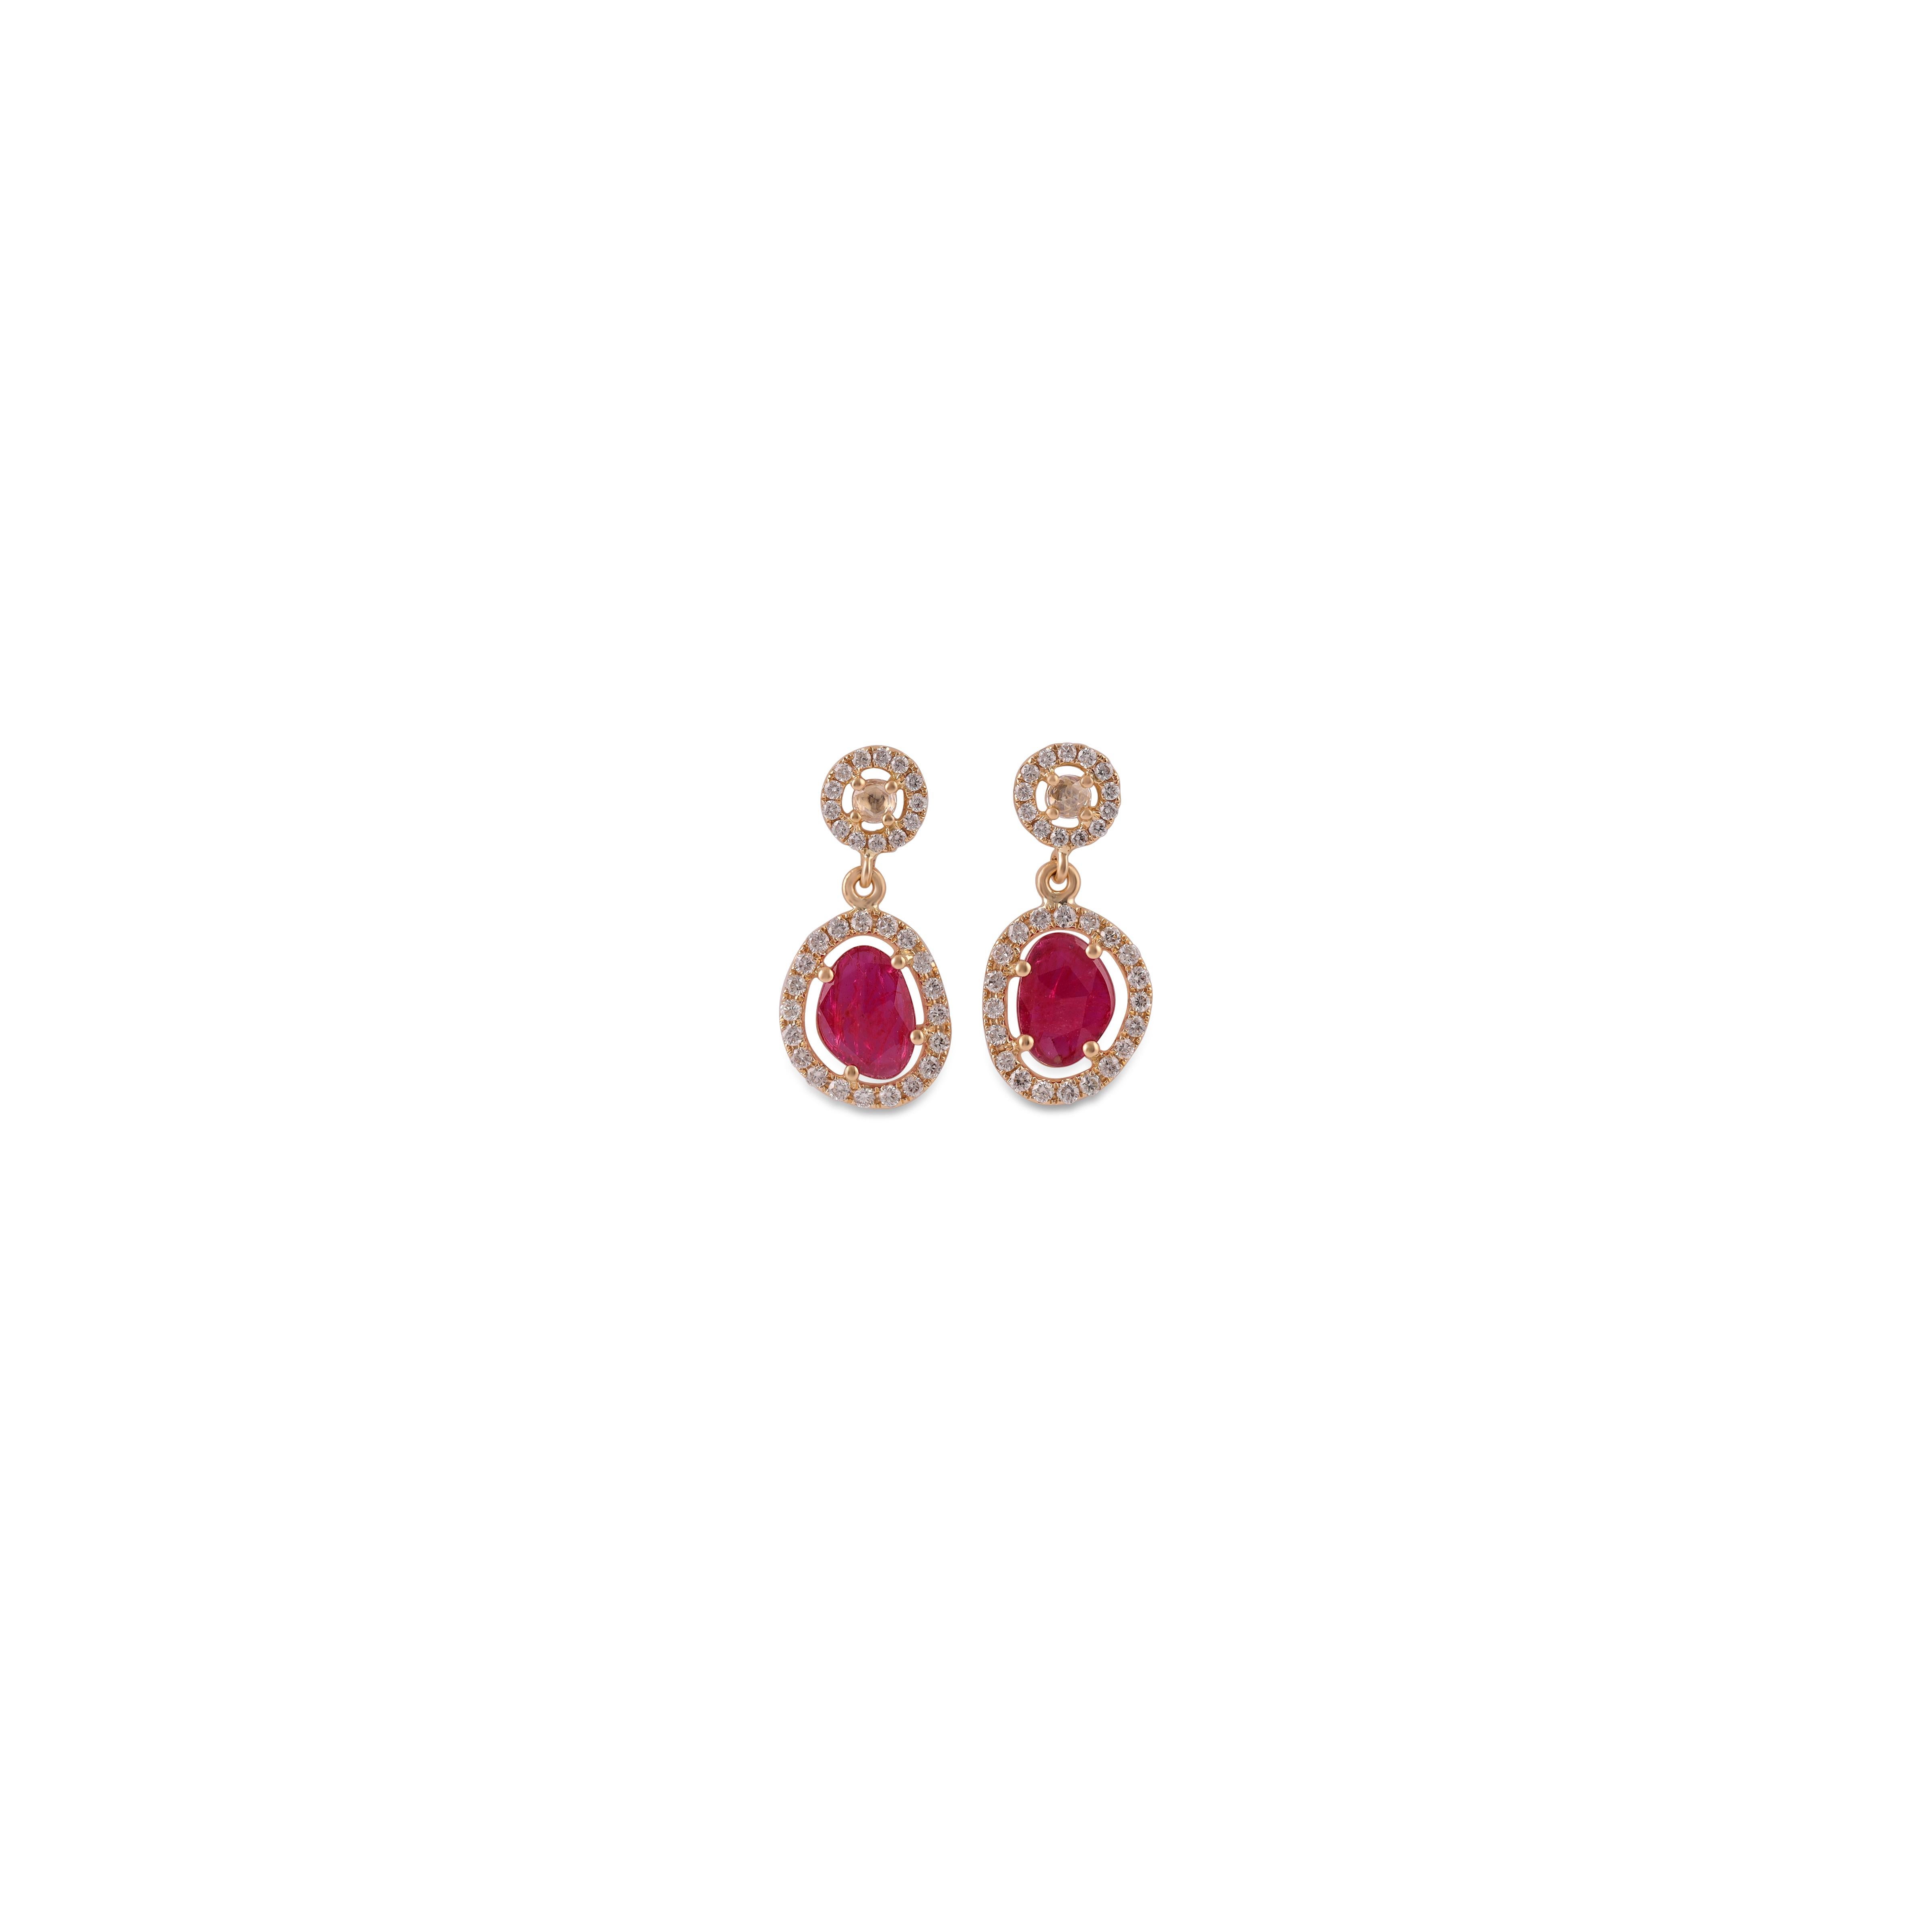 An exclusive pair of earrings with rose cut  Ruby 0.80 carat in the cluster with a round-shaped diamond 0.50 carat studded in 18K Yellow gold 2.78 grams with a simple pull-push mechanism. These are elegant & wearable earrings.

